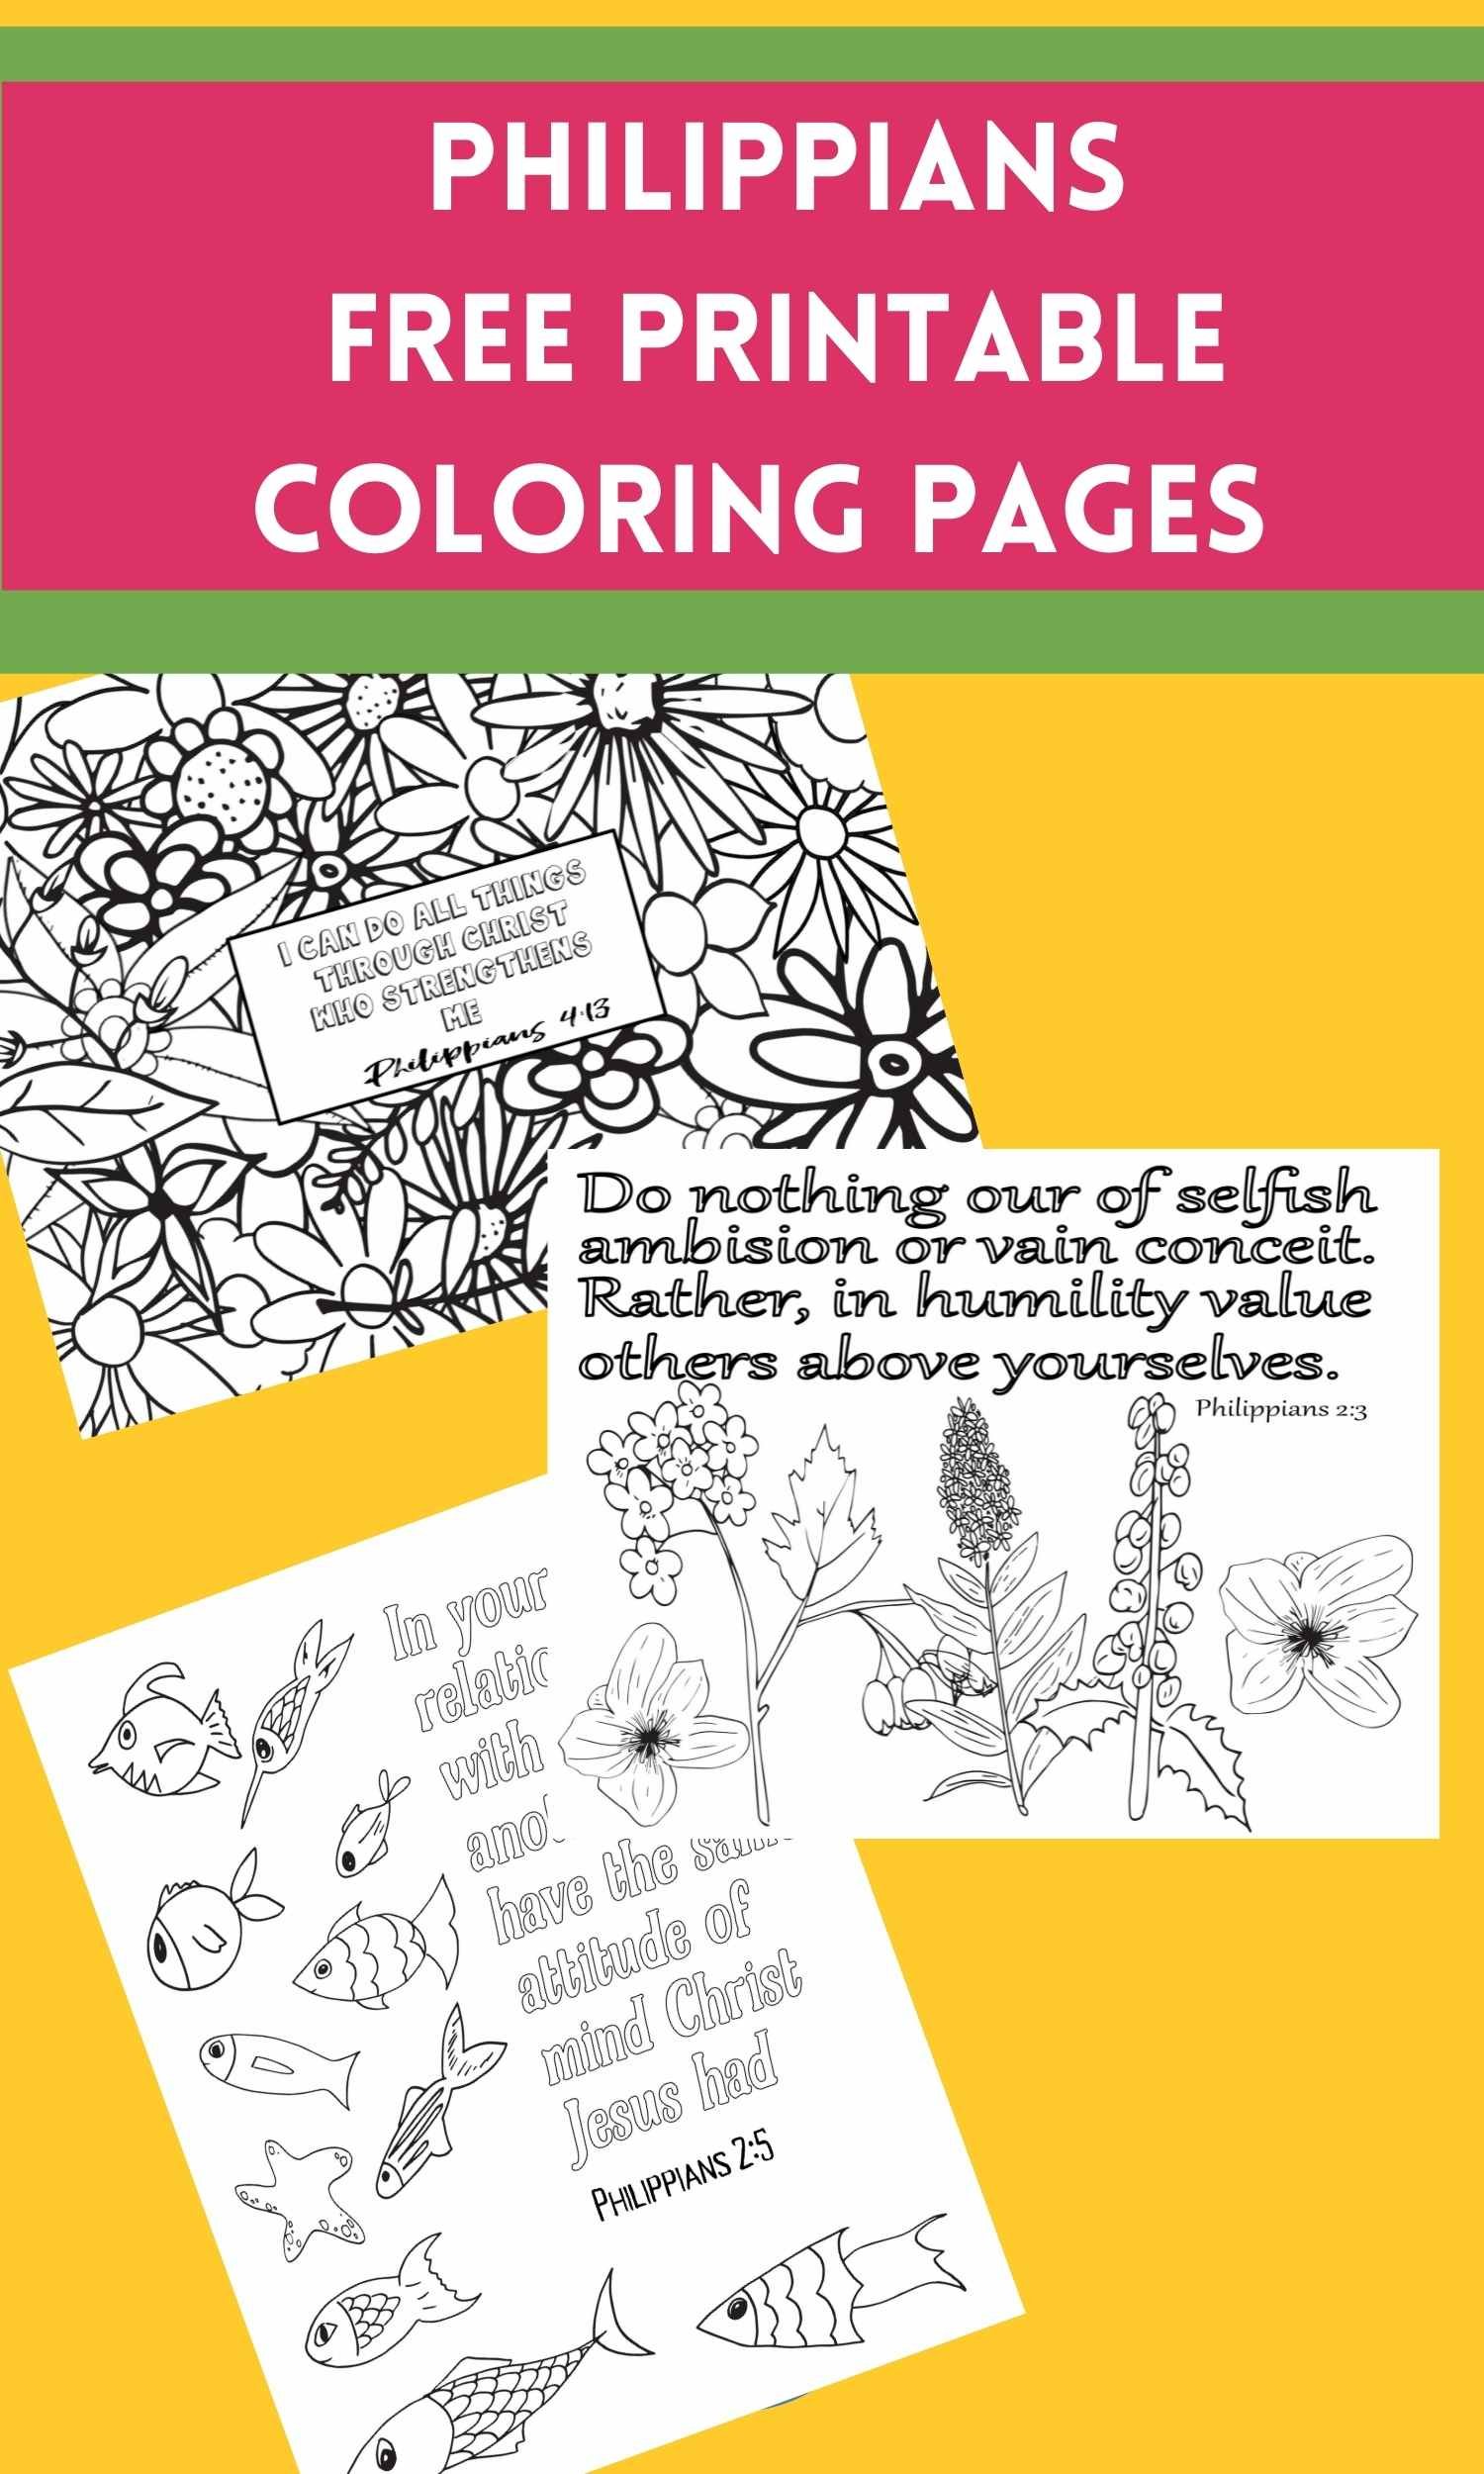 All Things Spring Coloring Page